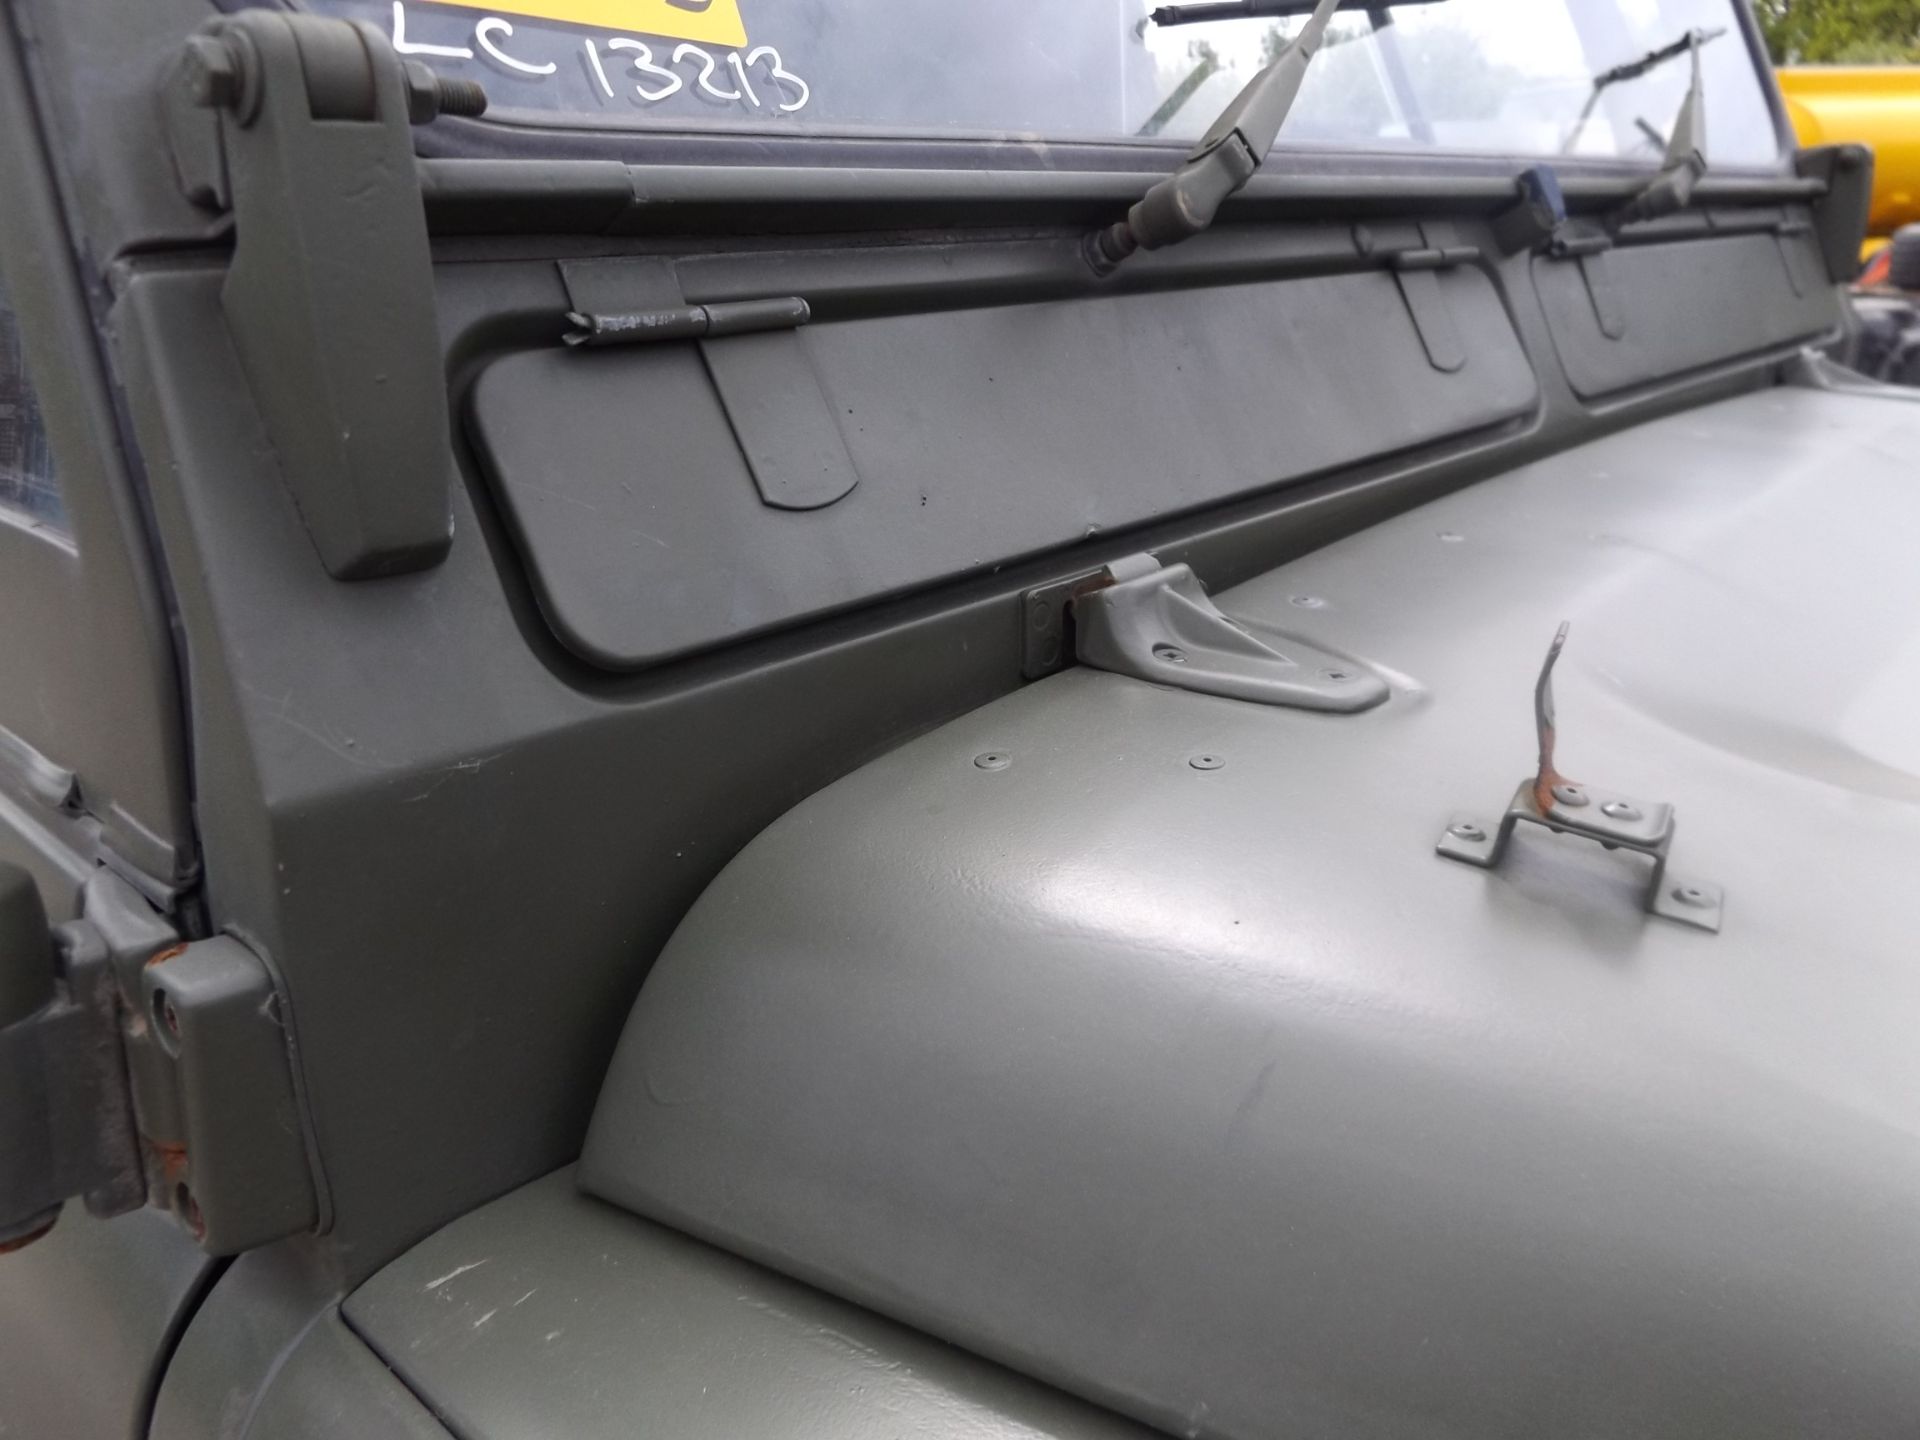 Land Rover Wolf 110 Hard Top damage repairable - Image 15 of 17